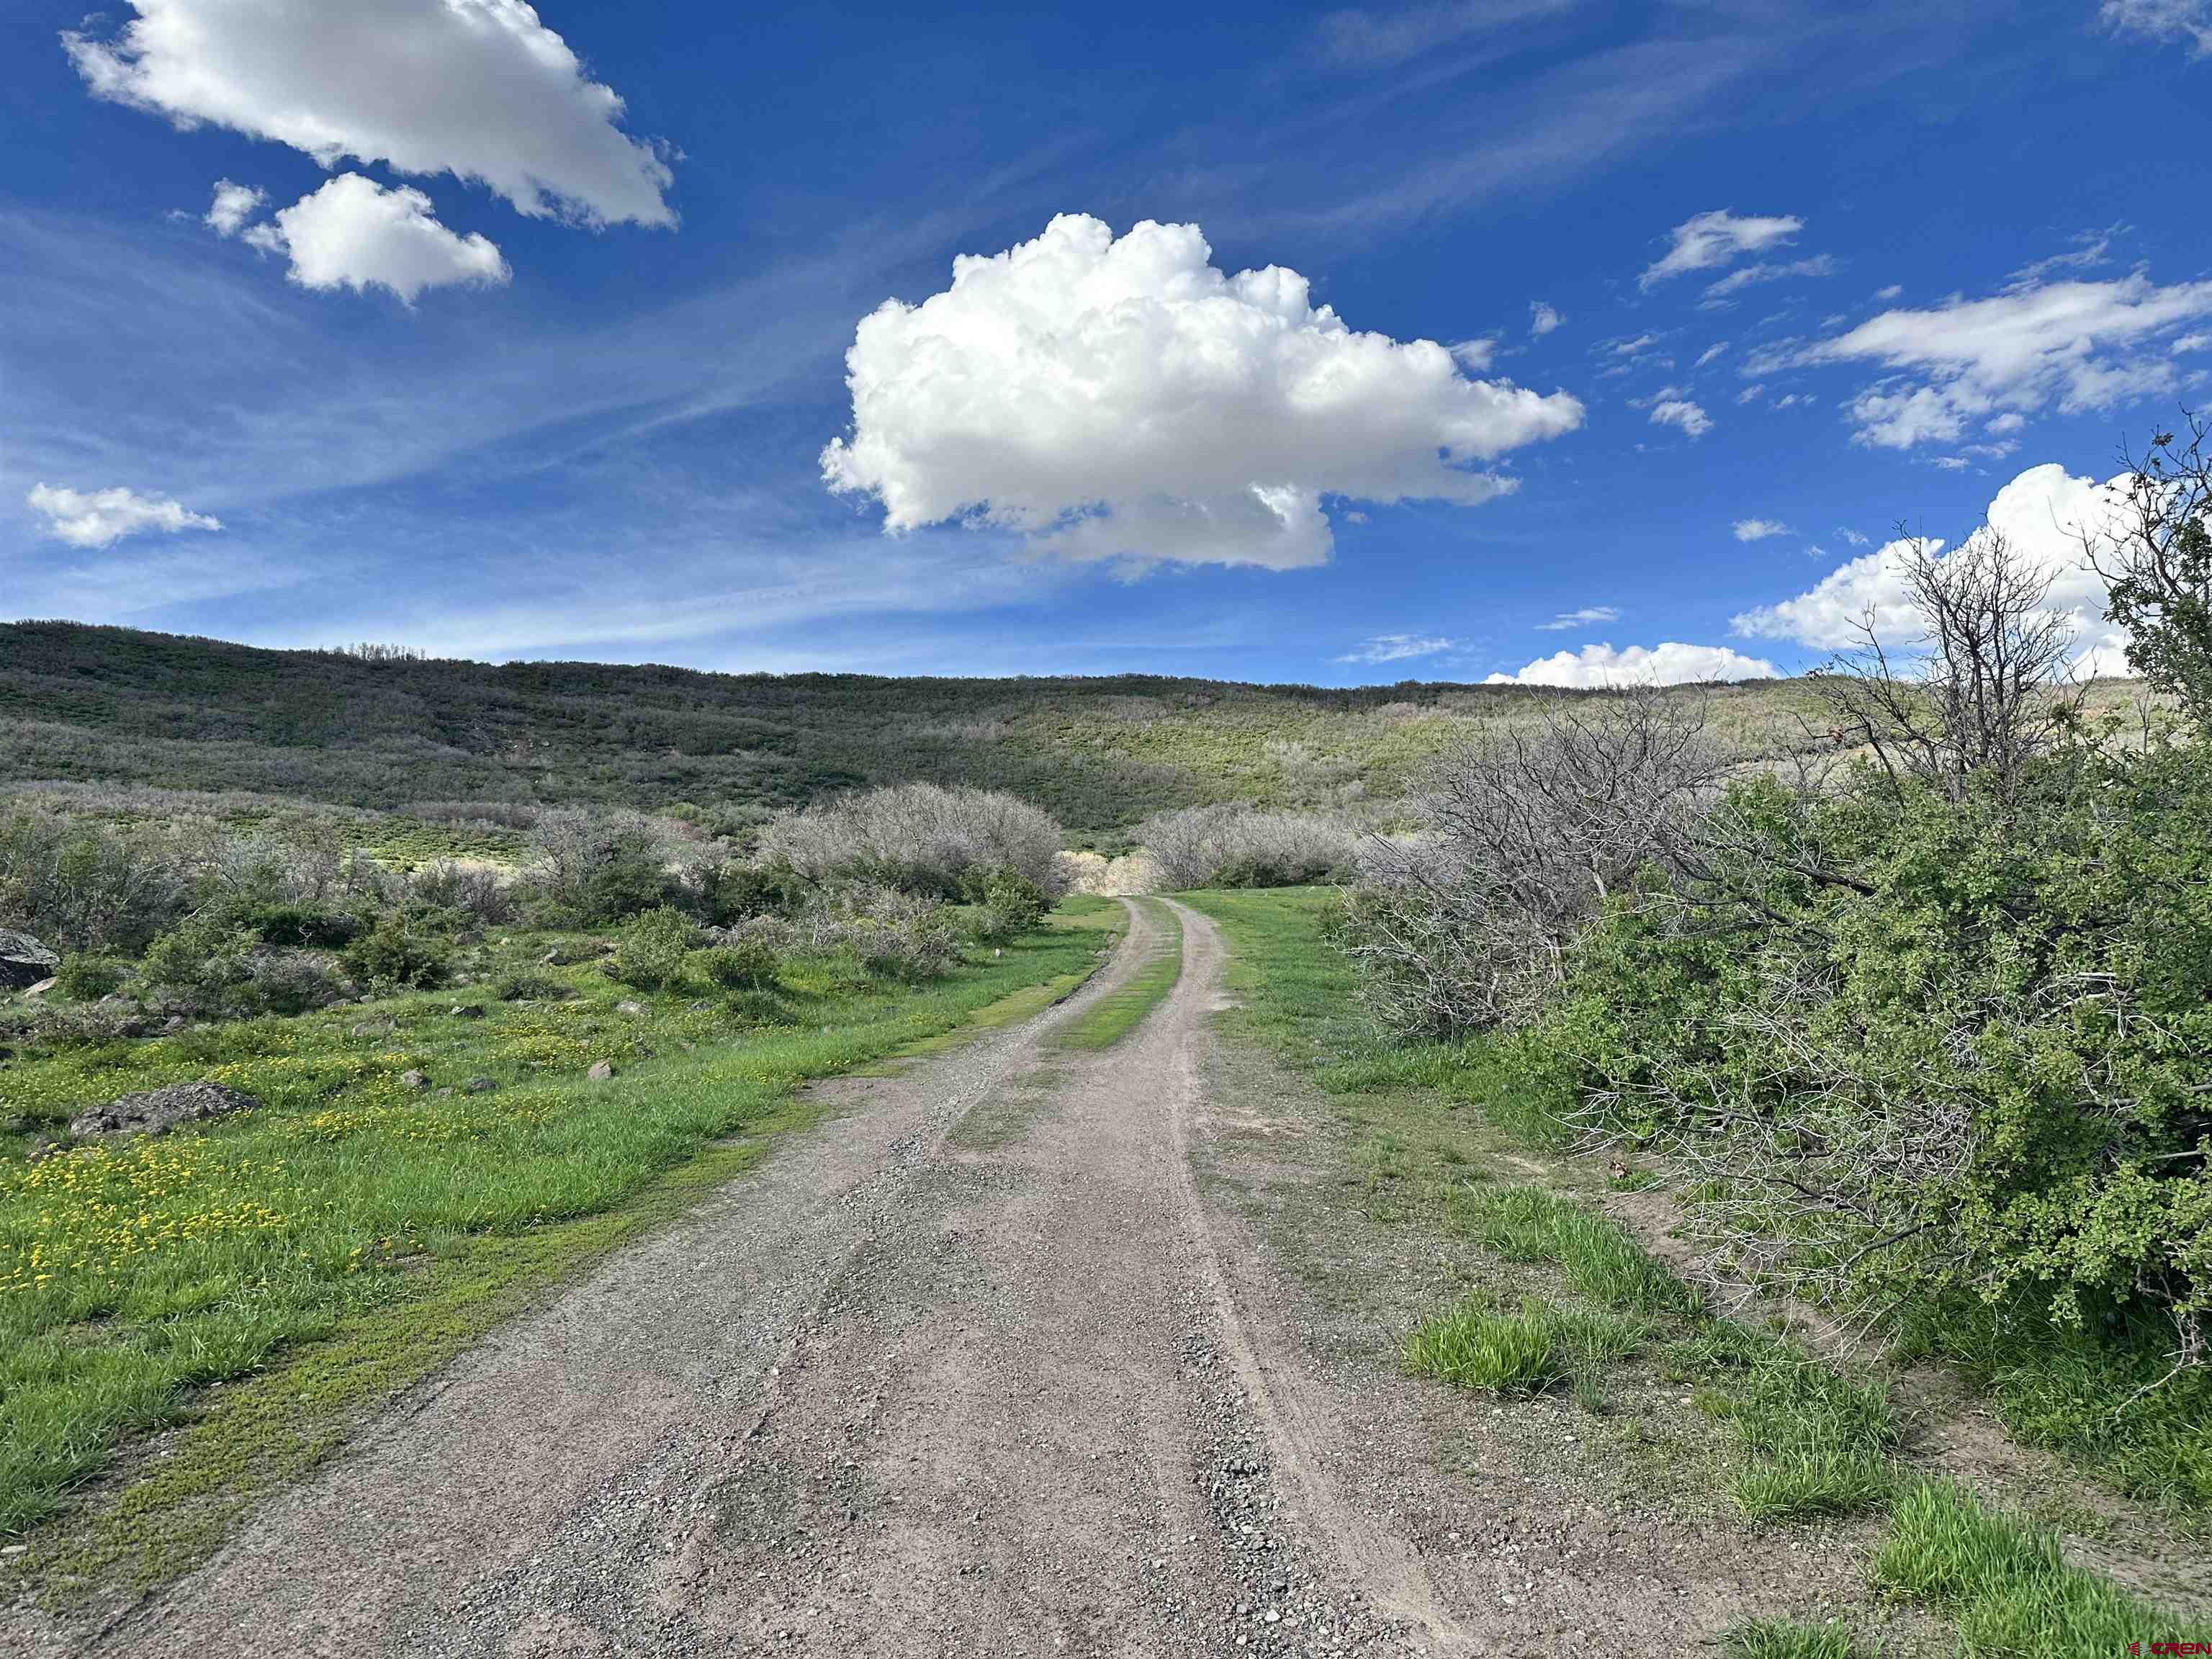 Incredible 40 acre parcel nestled at the base of the majestic Grand Mesa! Sitting on a south facing slope overlooking the gorgeous Cedaredge/Delta valley and surrounding mountains, the views from this property simply cannot be beat. A registered domestic well is already installed and is permitted for up to 3 residences, along with 1 acre of irrigation and watering of livestock. The parcel boasts multiple clearings and prime building sites! With varying terrain and foliage, this piece of property has so much to offer. Stands of scrub oak, pinion, sagebrush, rocky mountain junipers, and other native species call this land home. There is also a small retention pond that has been dug, perfect for keeping livestock watered. The property is just north of Cedaredge and is only minutes from public lands and a plethora of recreational opportunities. Come build your dream home on this secluded piece of Rocky Mountain paradise! *More pictures coming soon!*